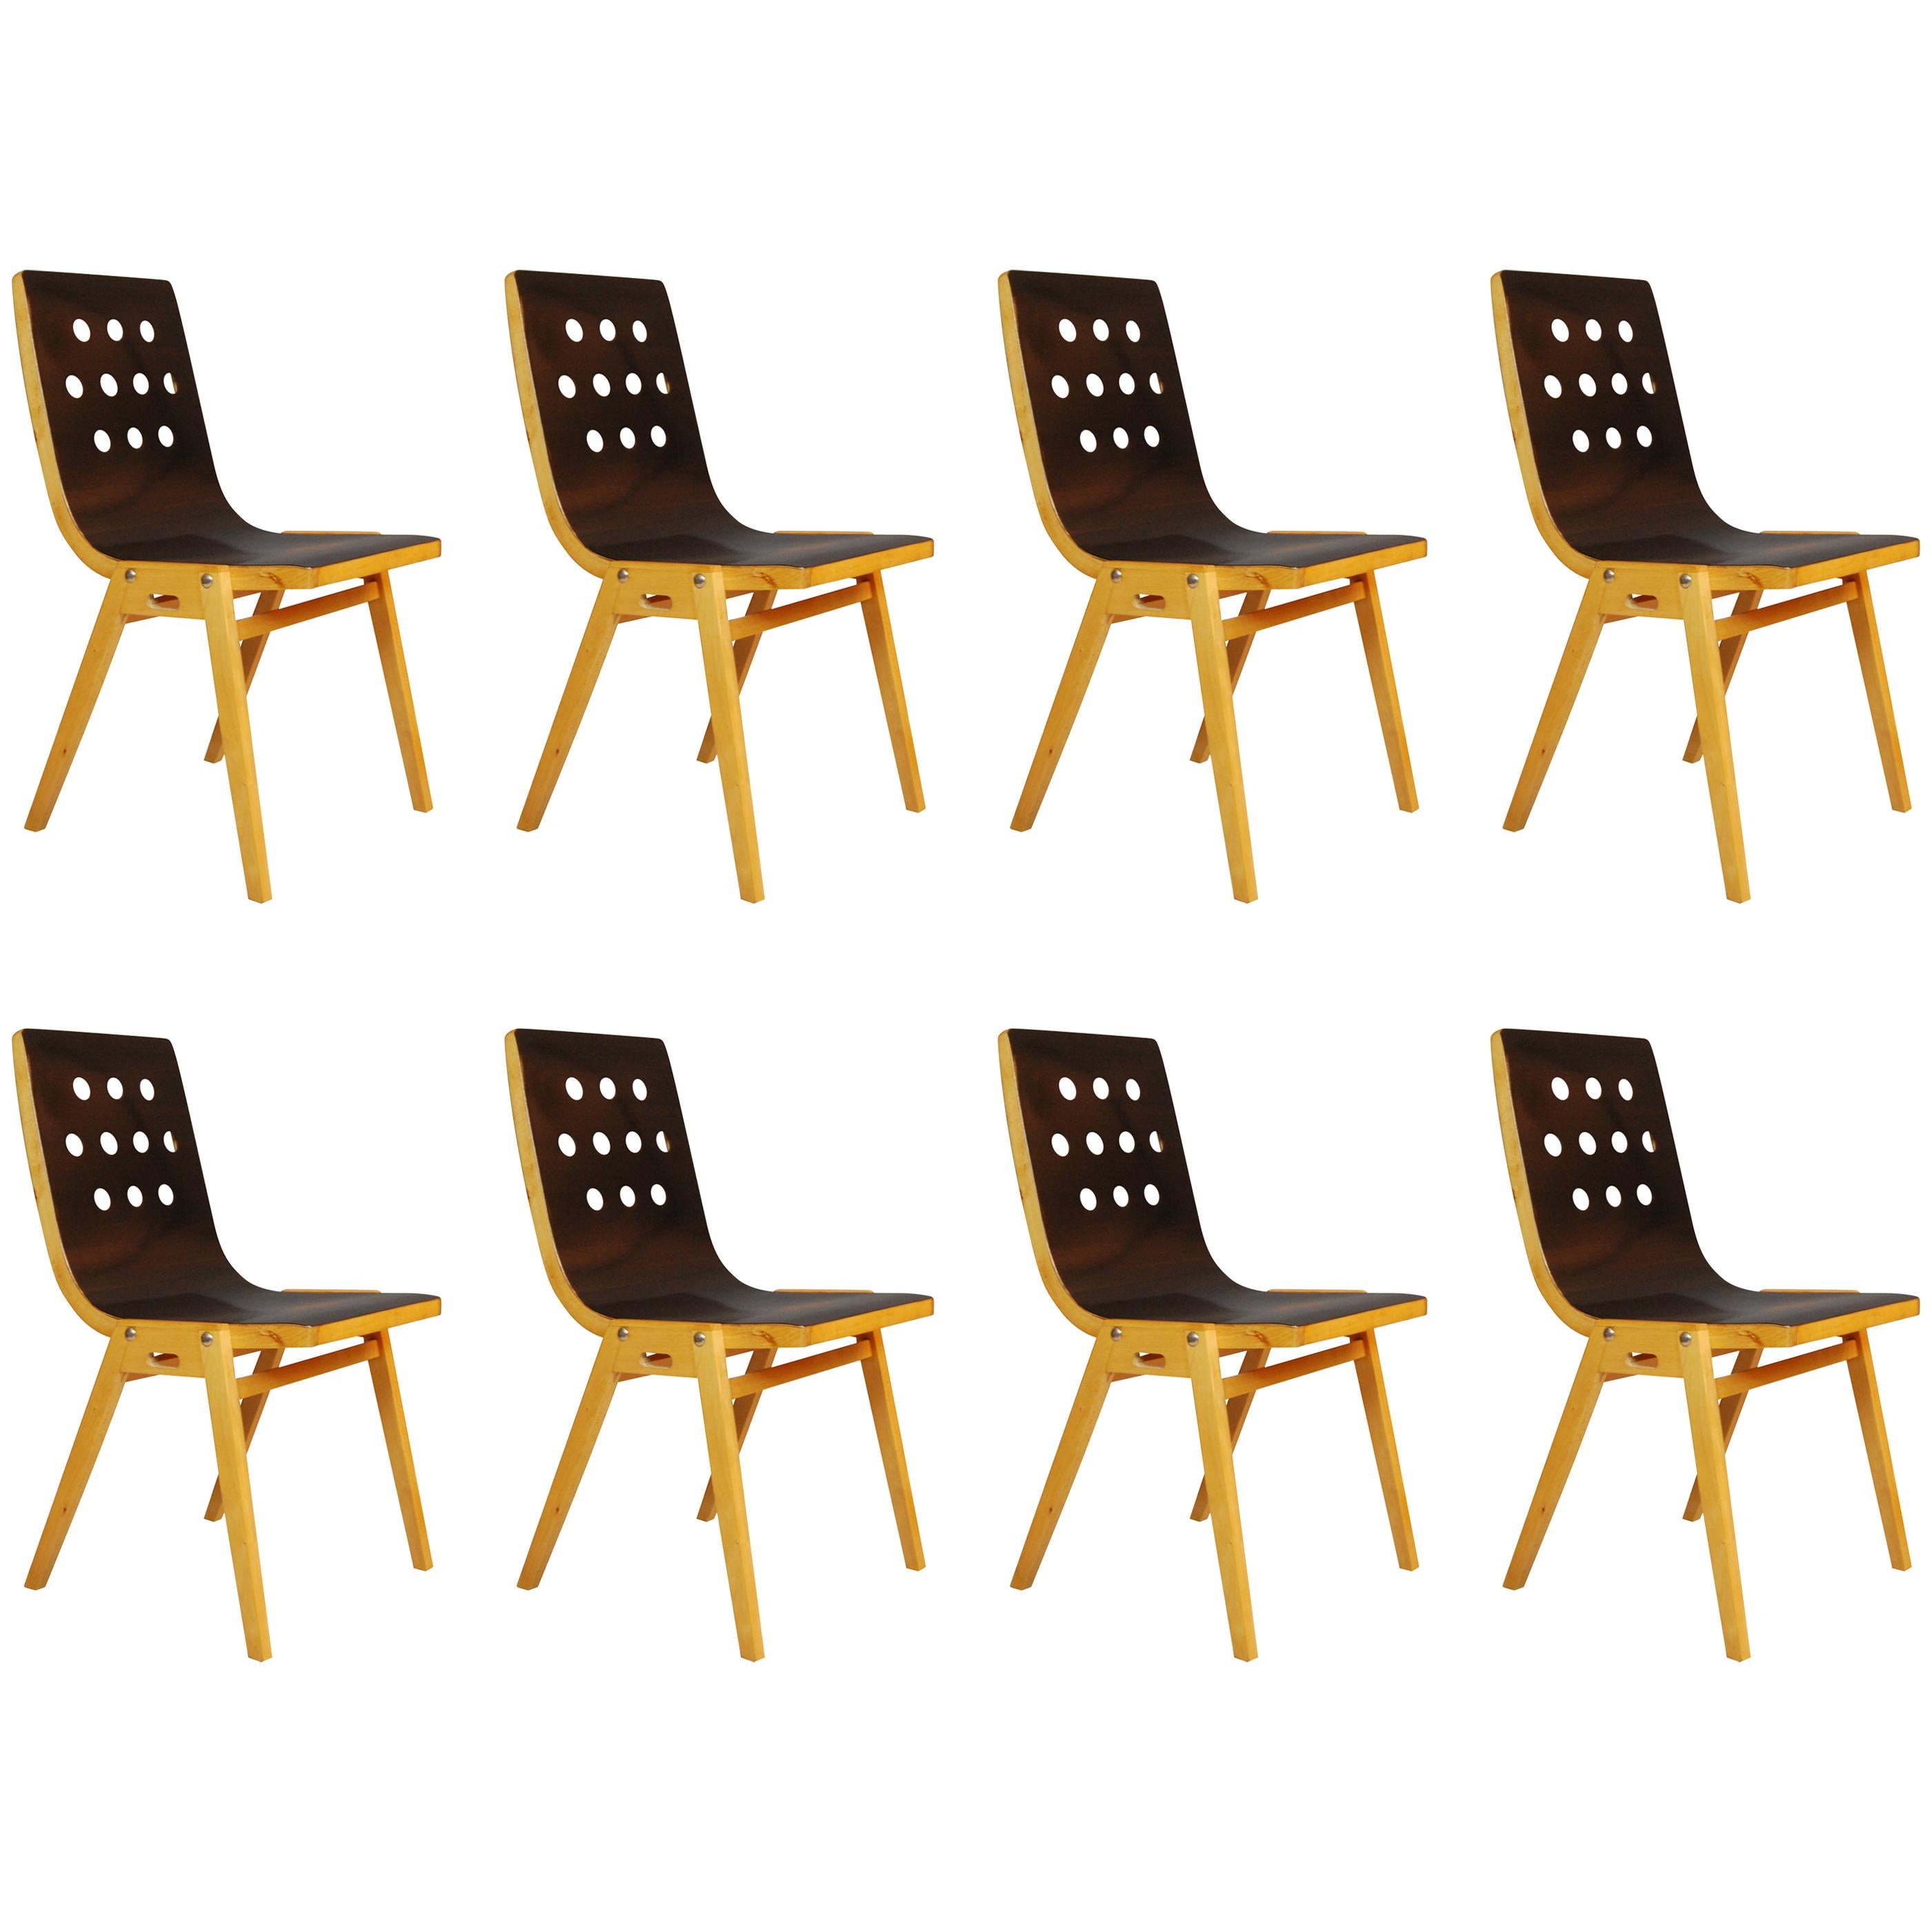 Roland Rainer, Set of Ten Stacking Chairs, 1951